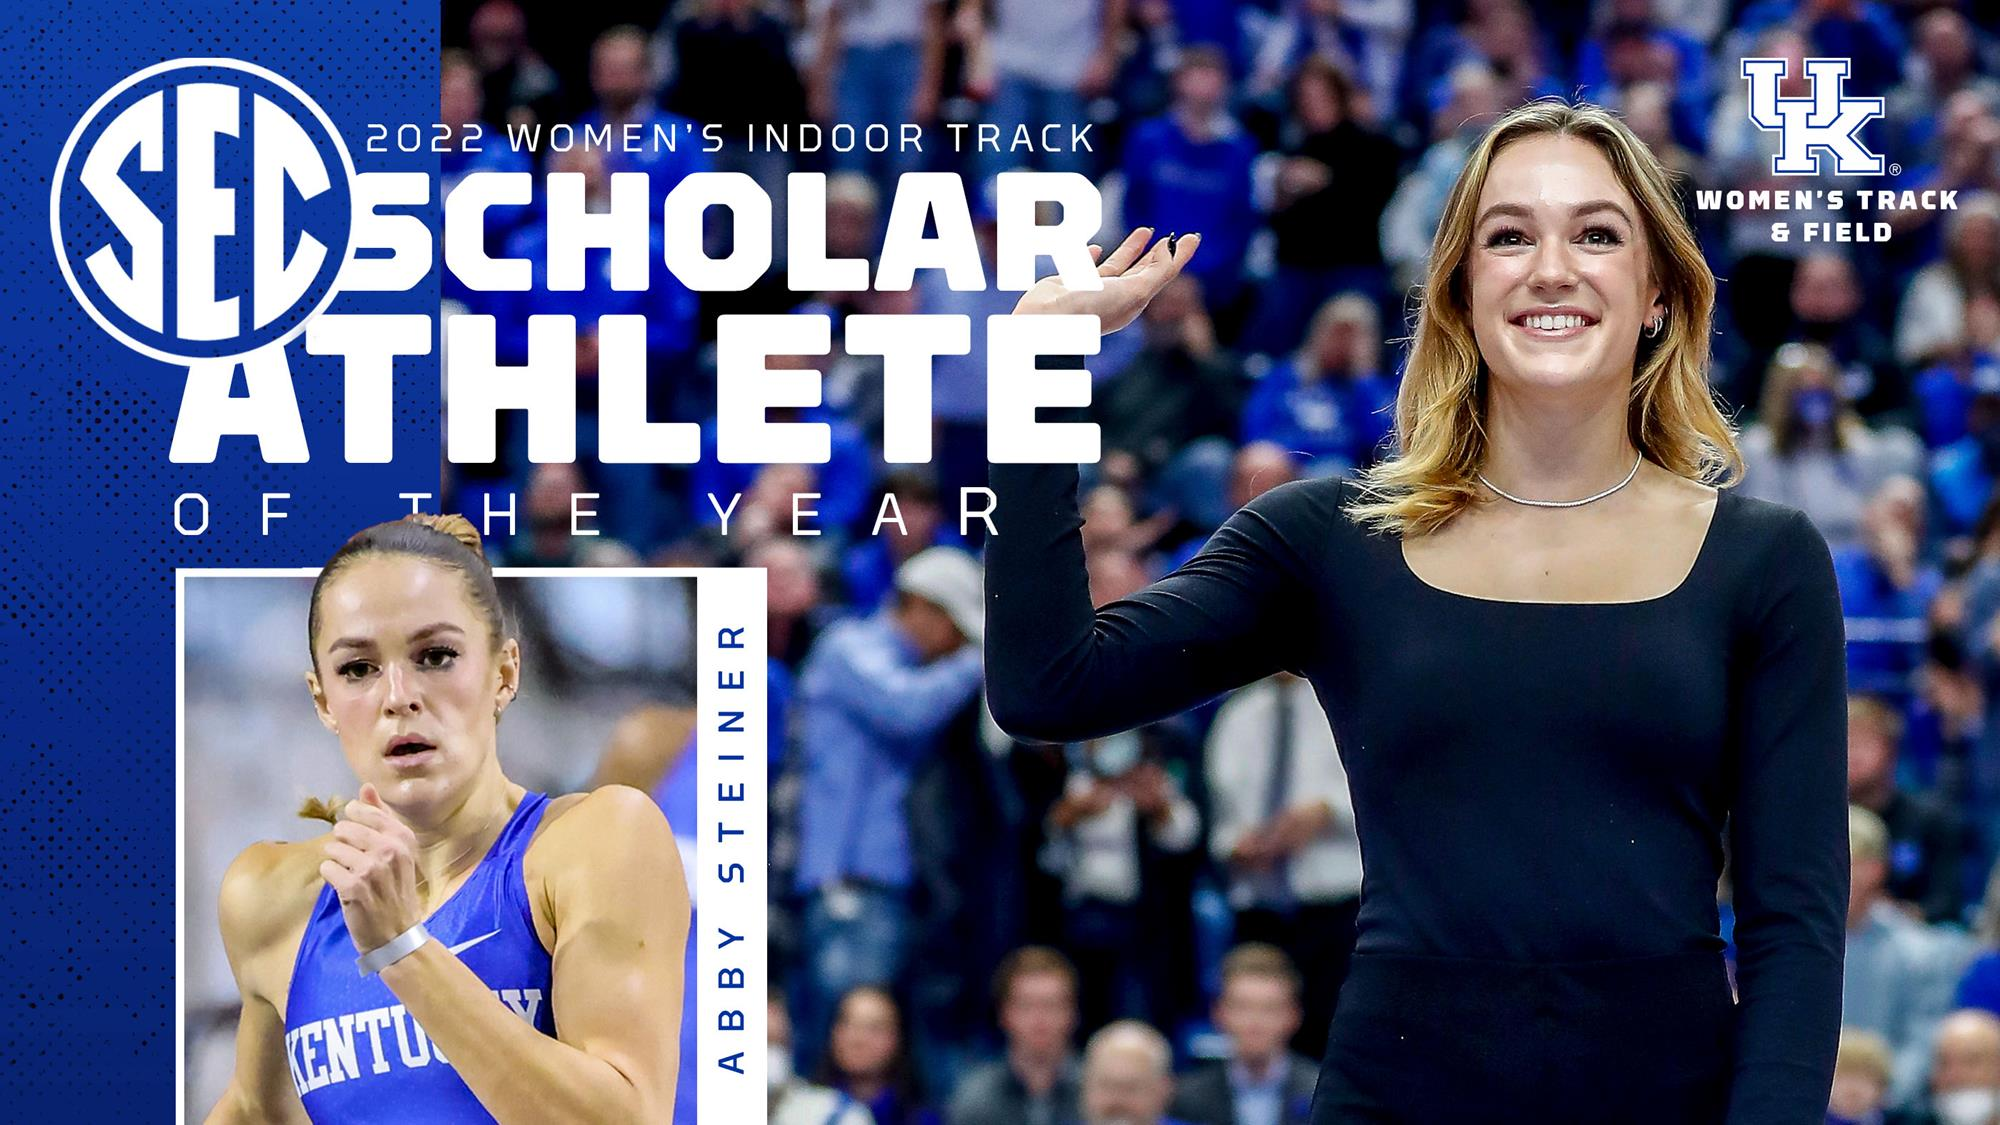 Abby Steiner Wins SEC Scholar-Athlete of the Year